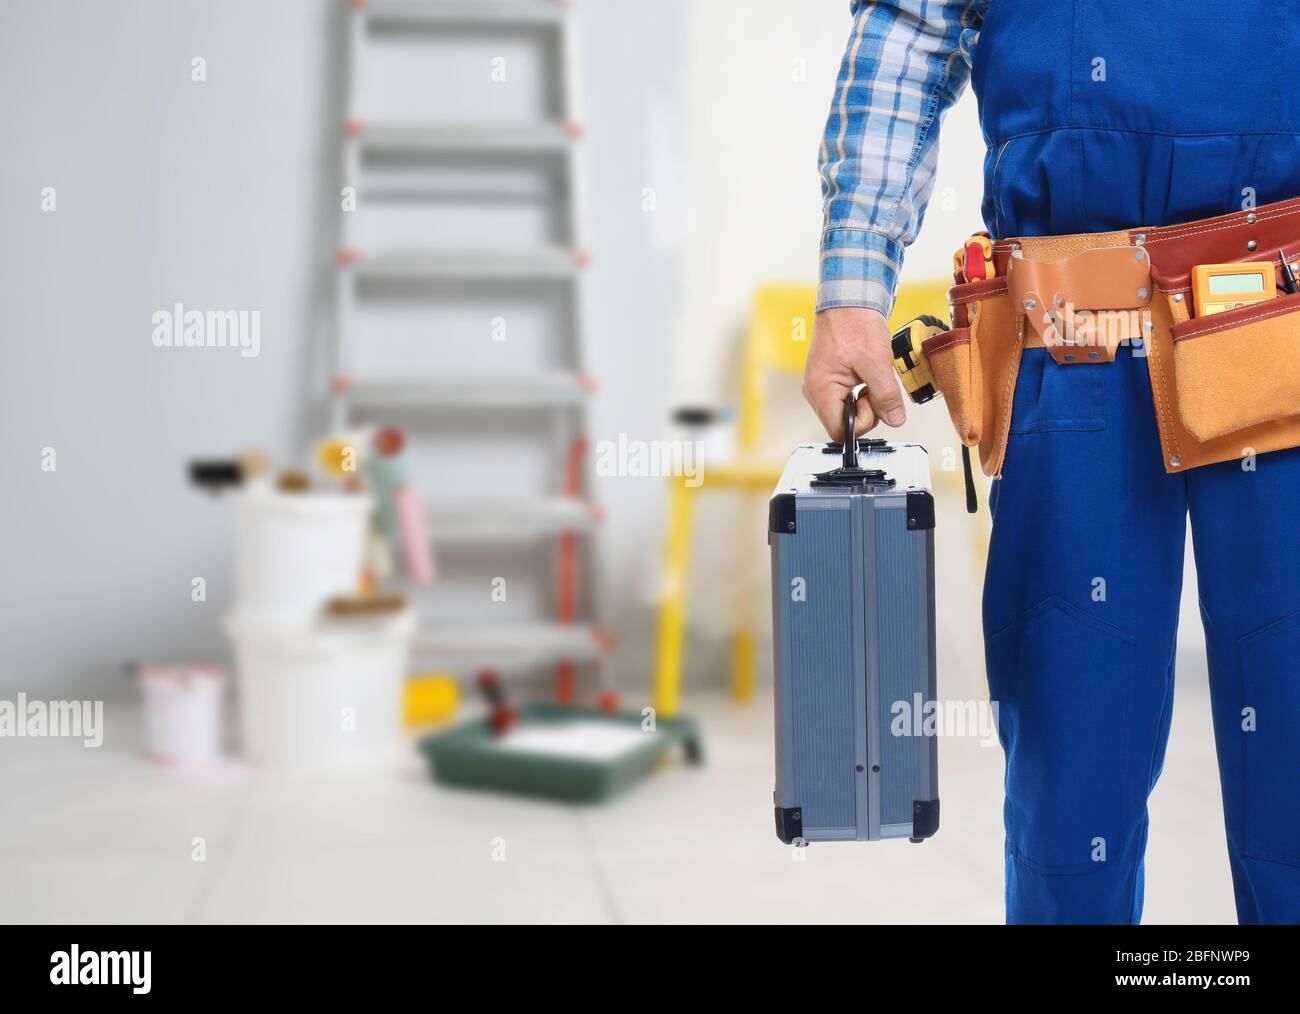 Electrician with tools on blurred background Stock Photo